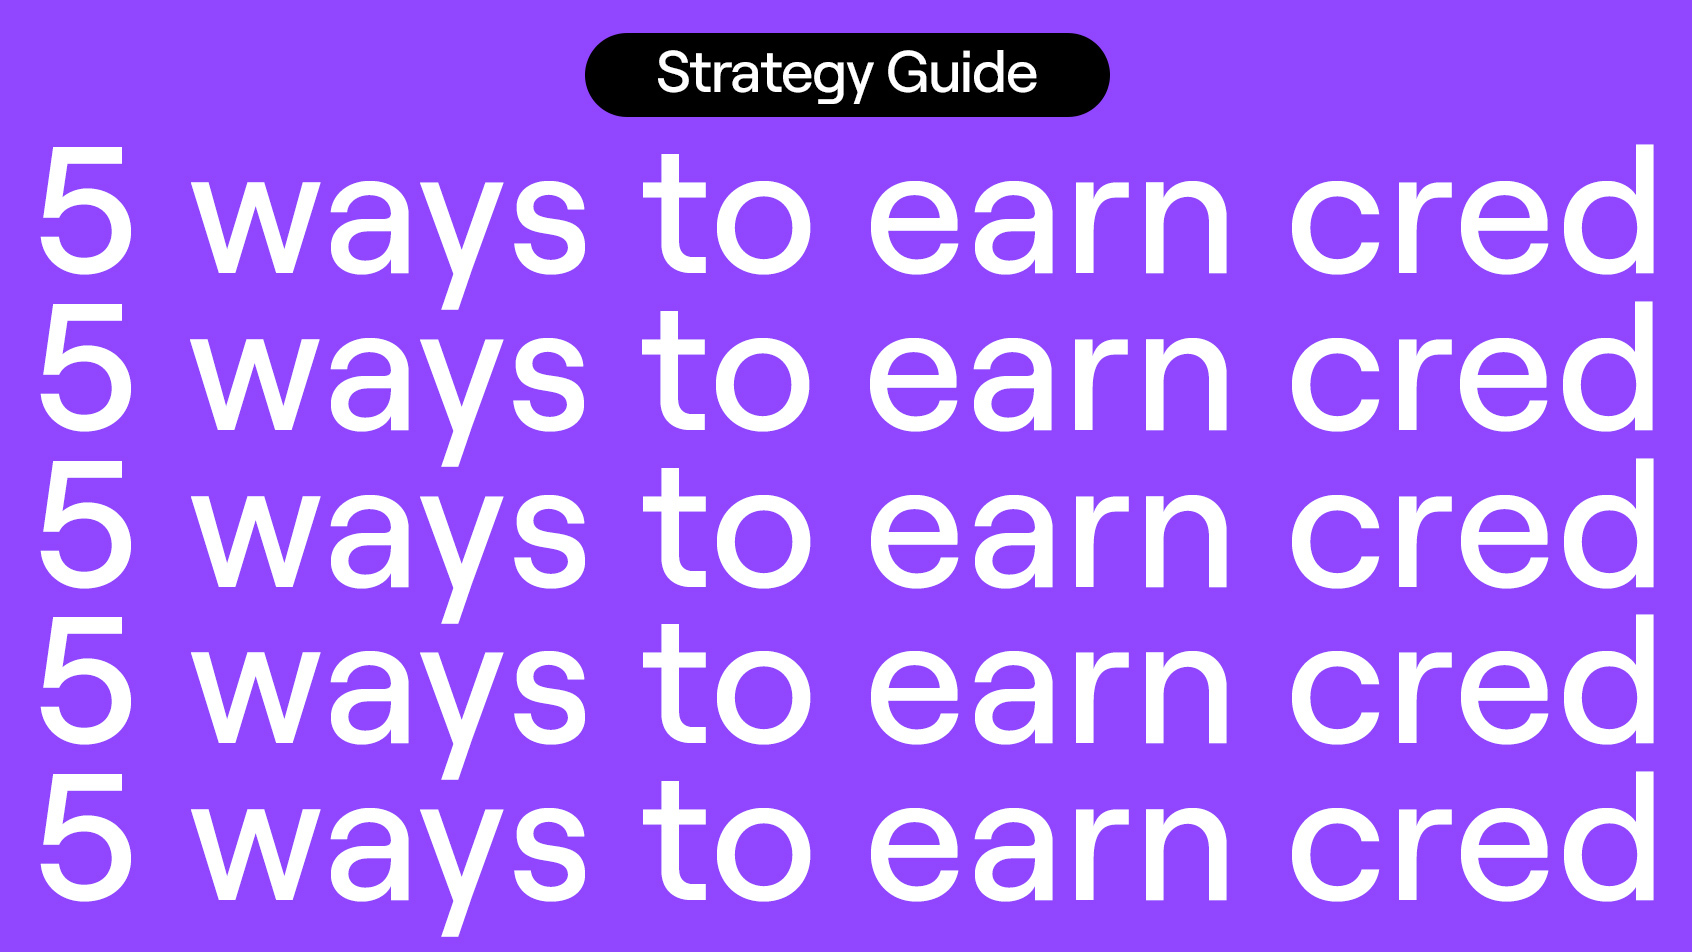 Strategy guide: 5 ways to earn cred